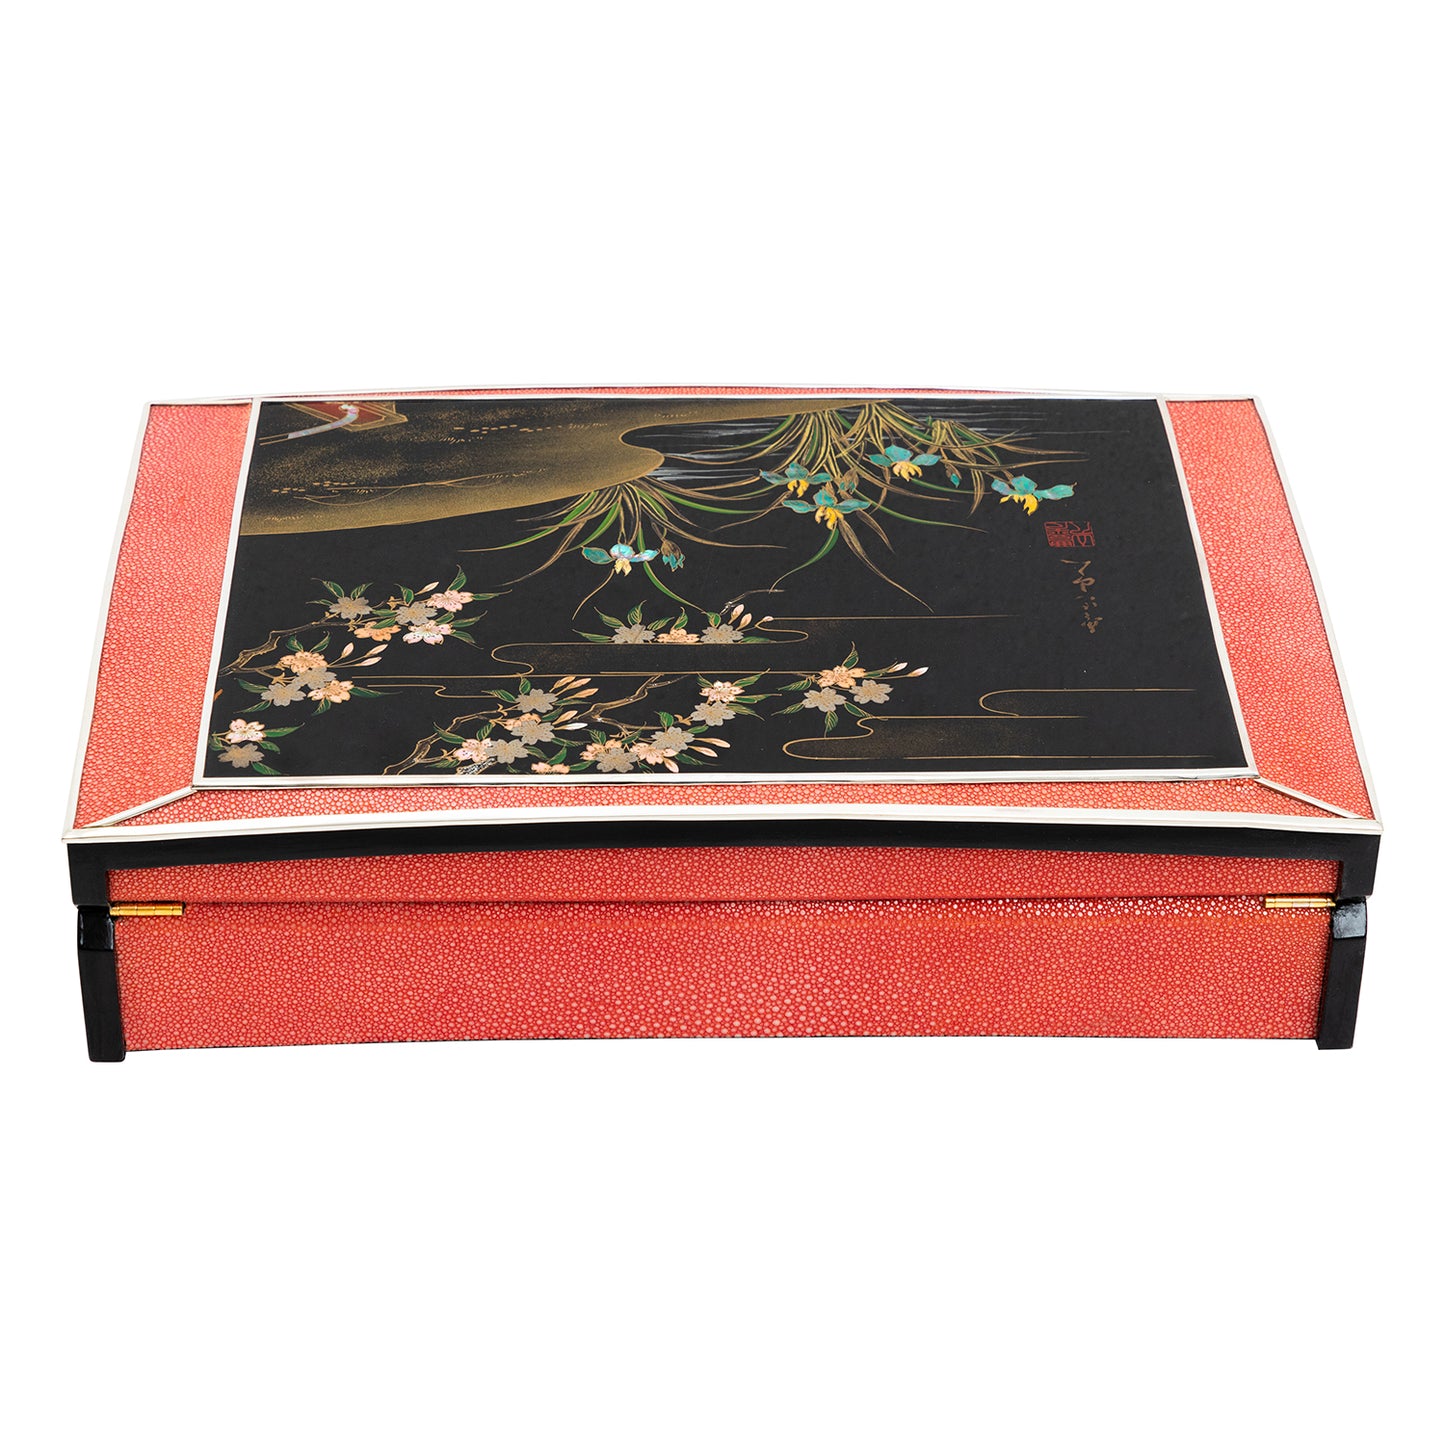 Under the Cherry Blossoms at Midnight Jewellery Box